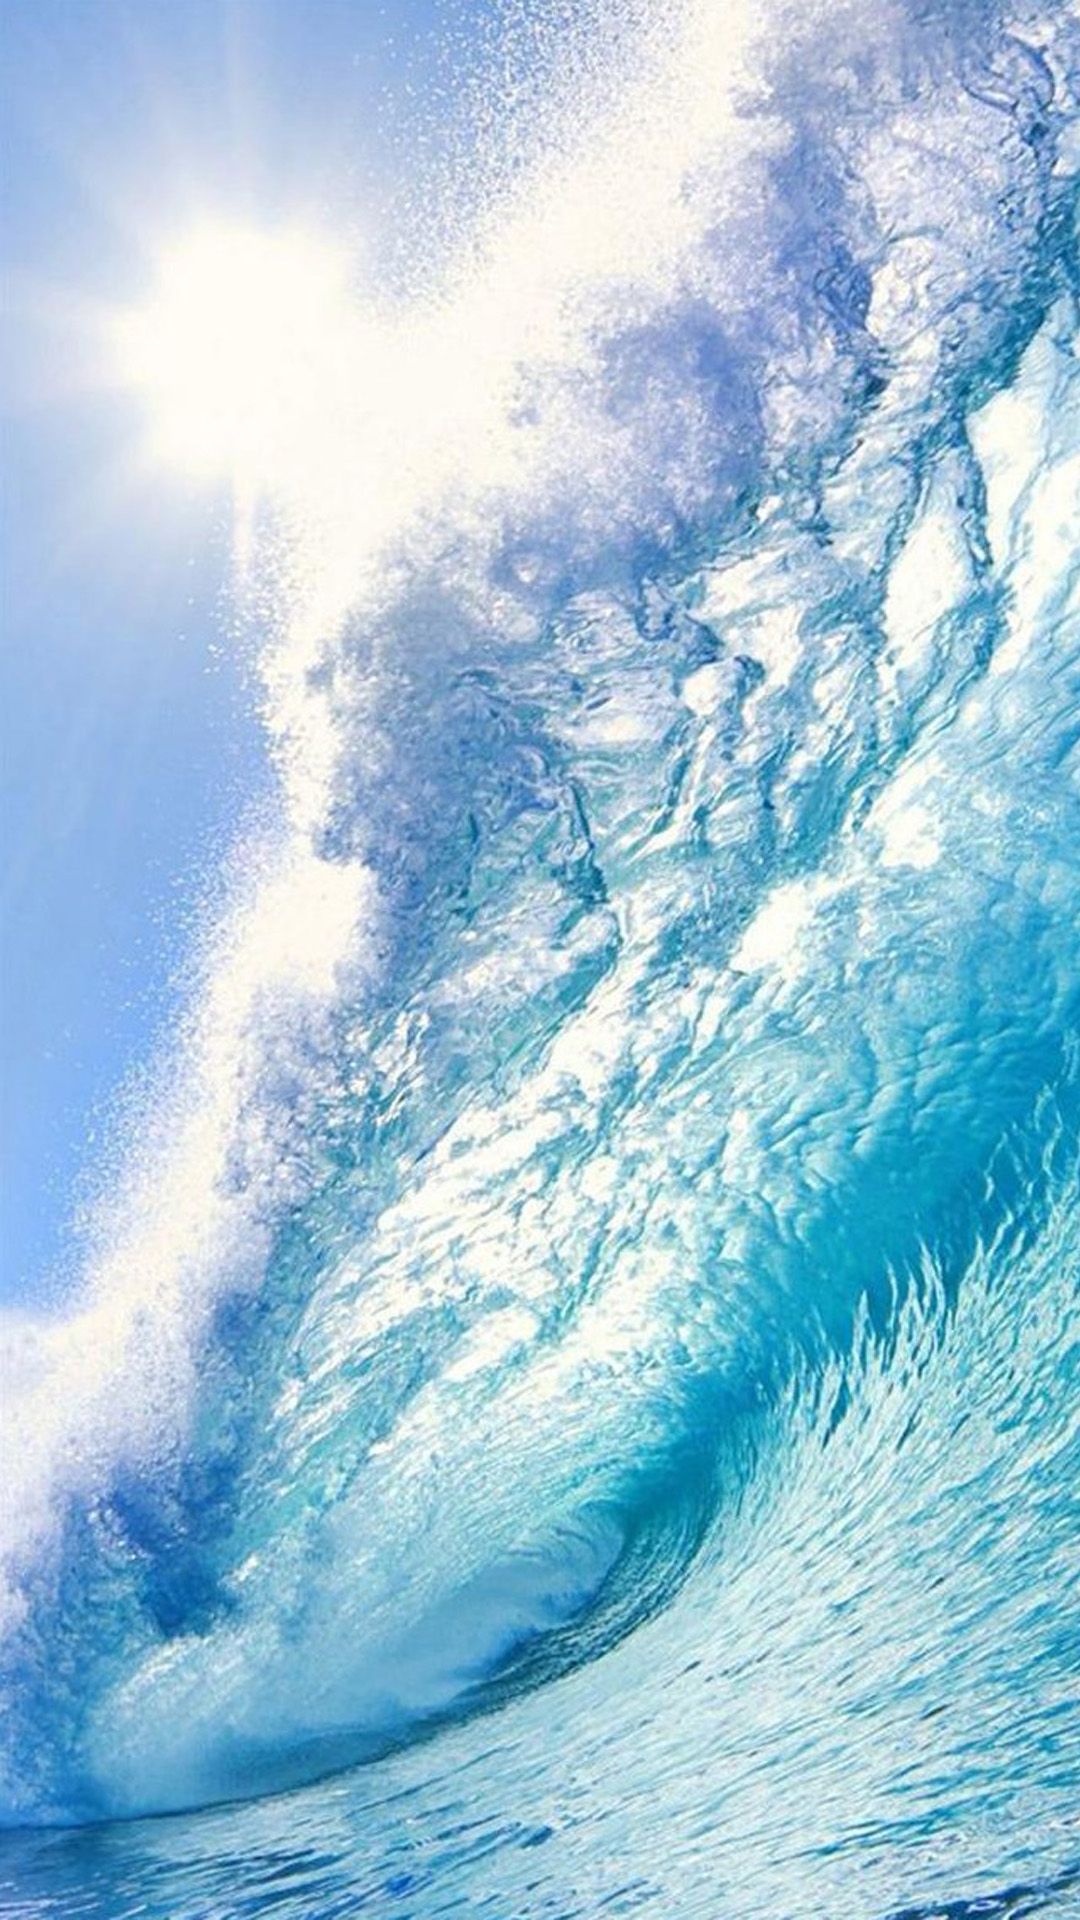 Beach Surf Wave Sea. Android Wallpaper. Surfing waves, Waves wallpaper, Ocean wallpaper